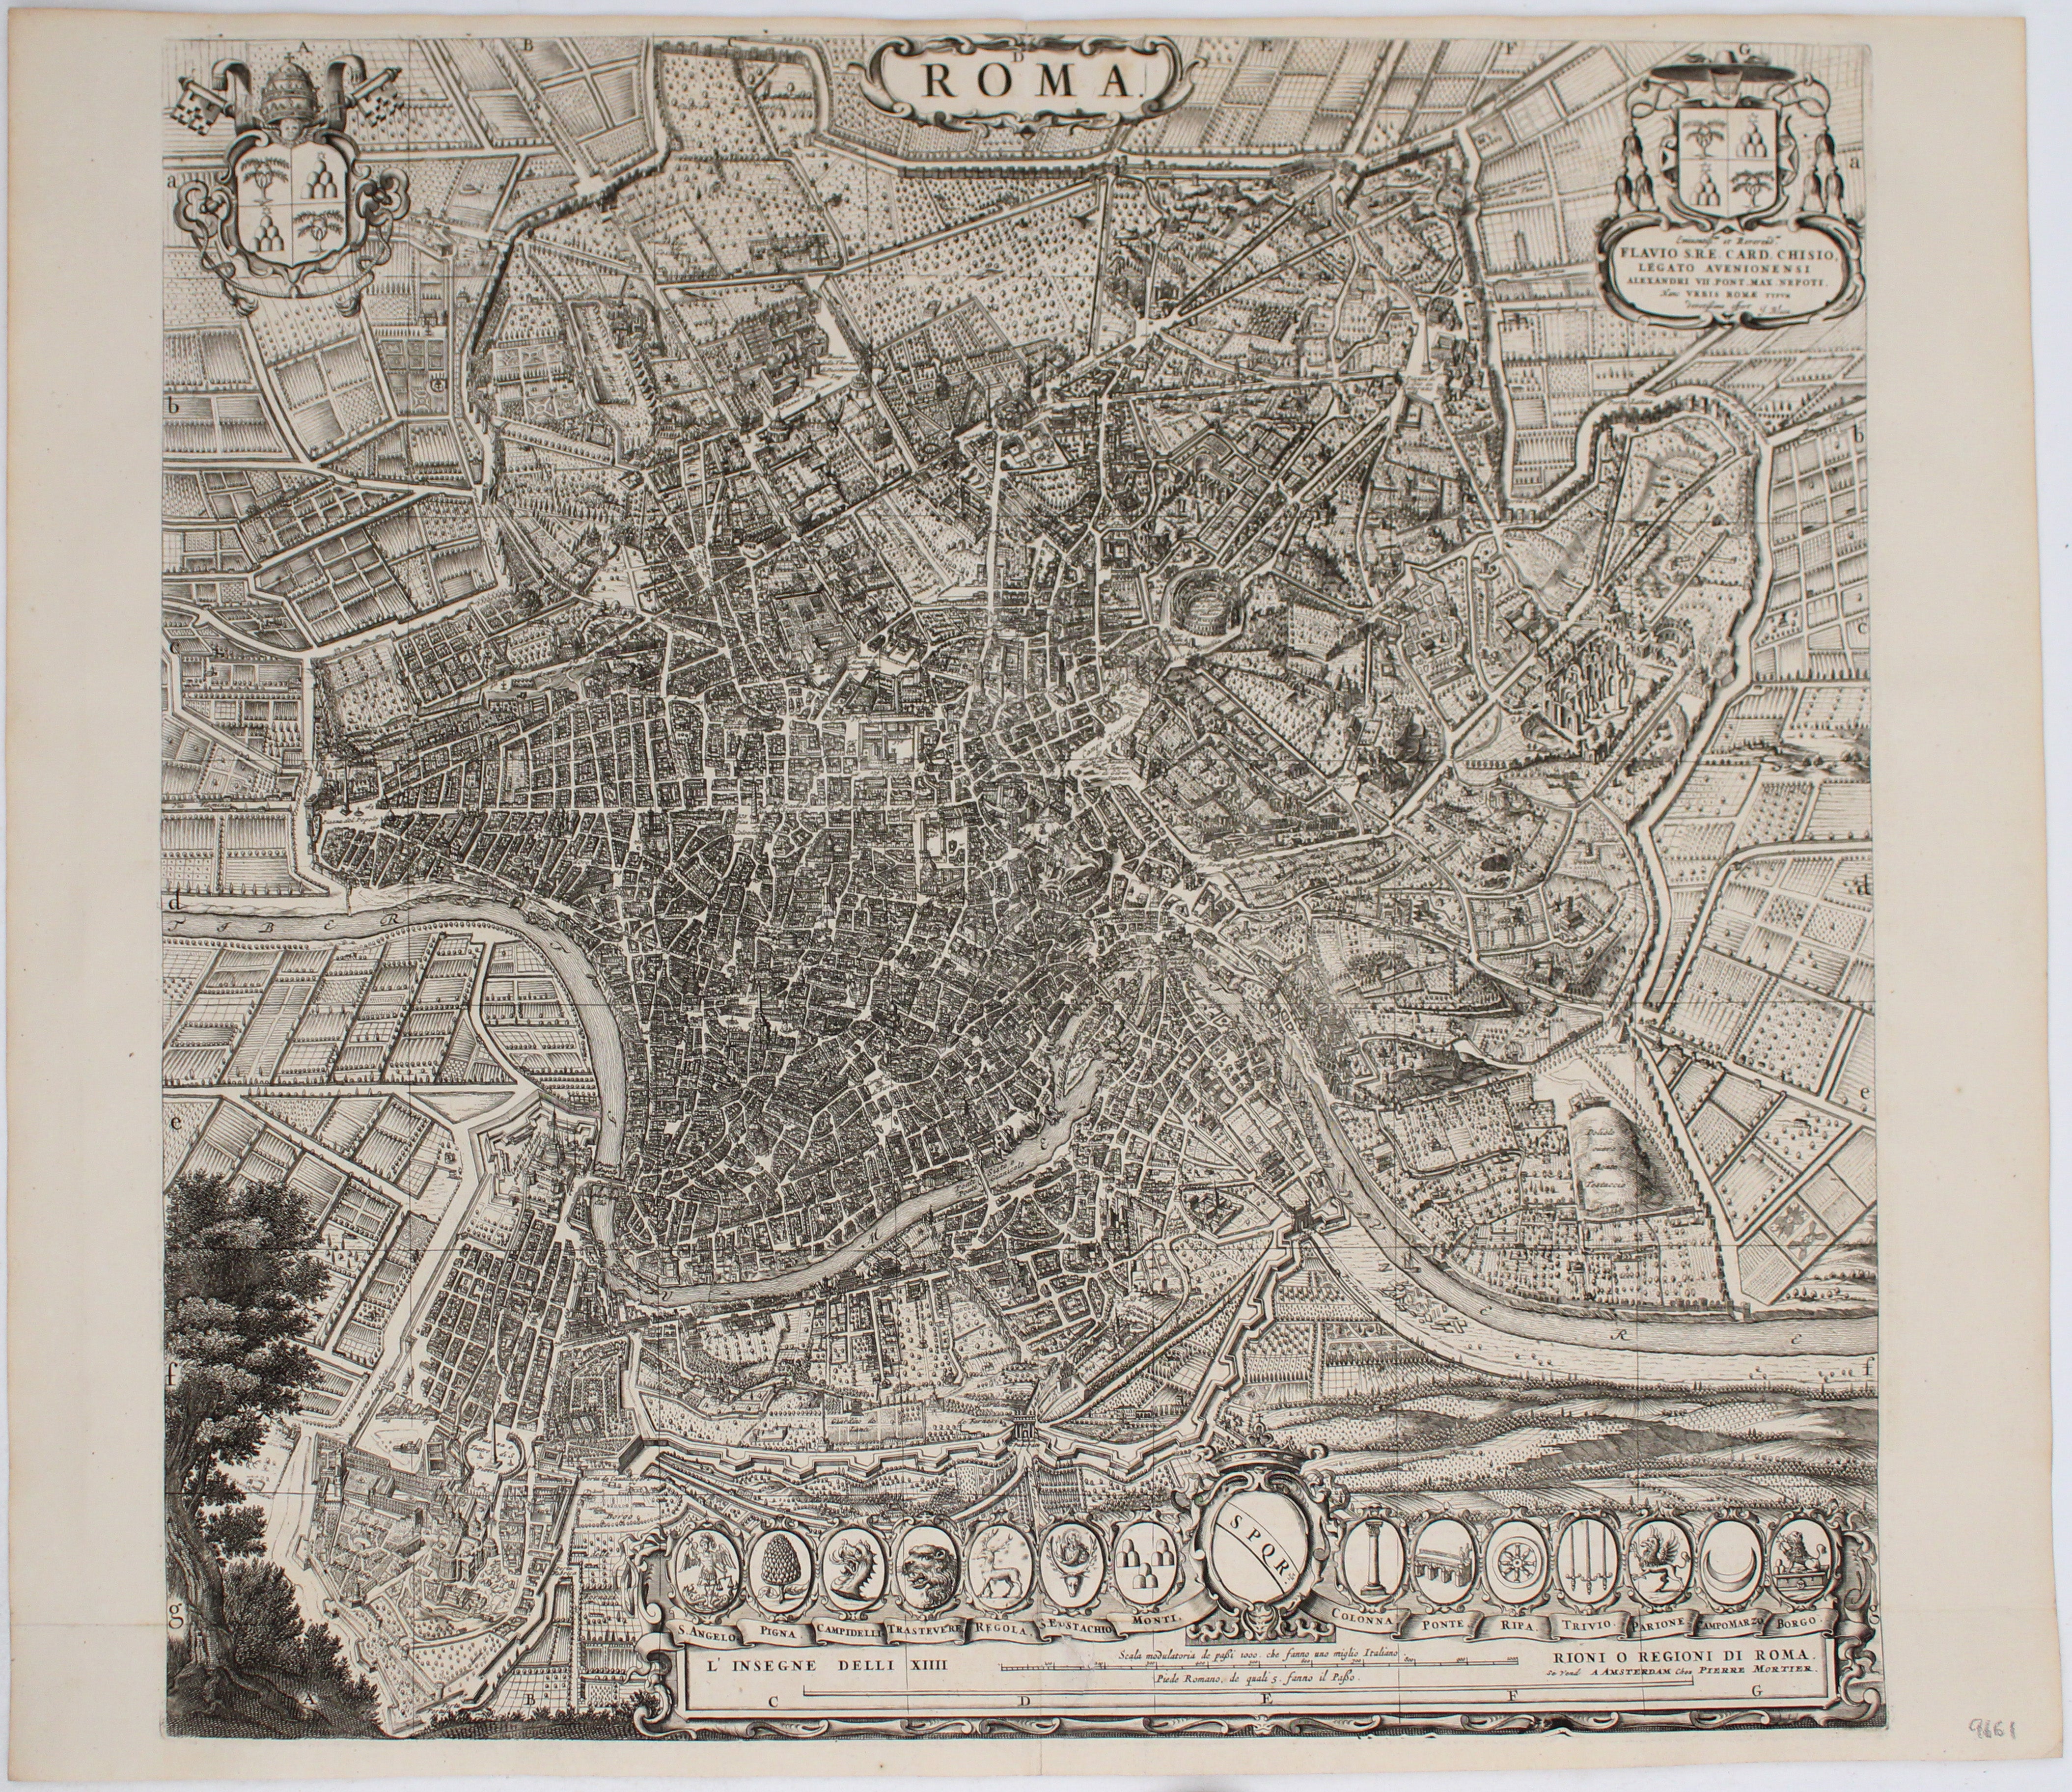 Blaeu's Map of Rome – Mortier Edition